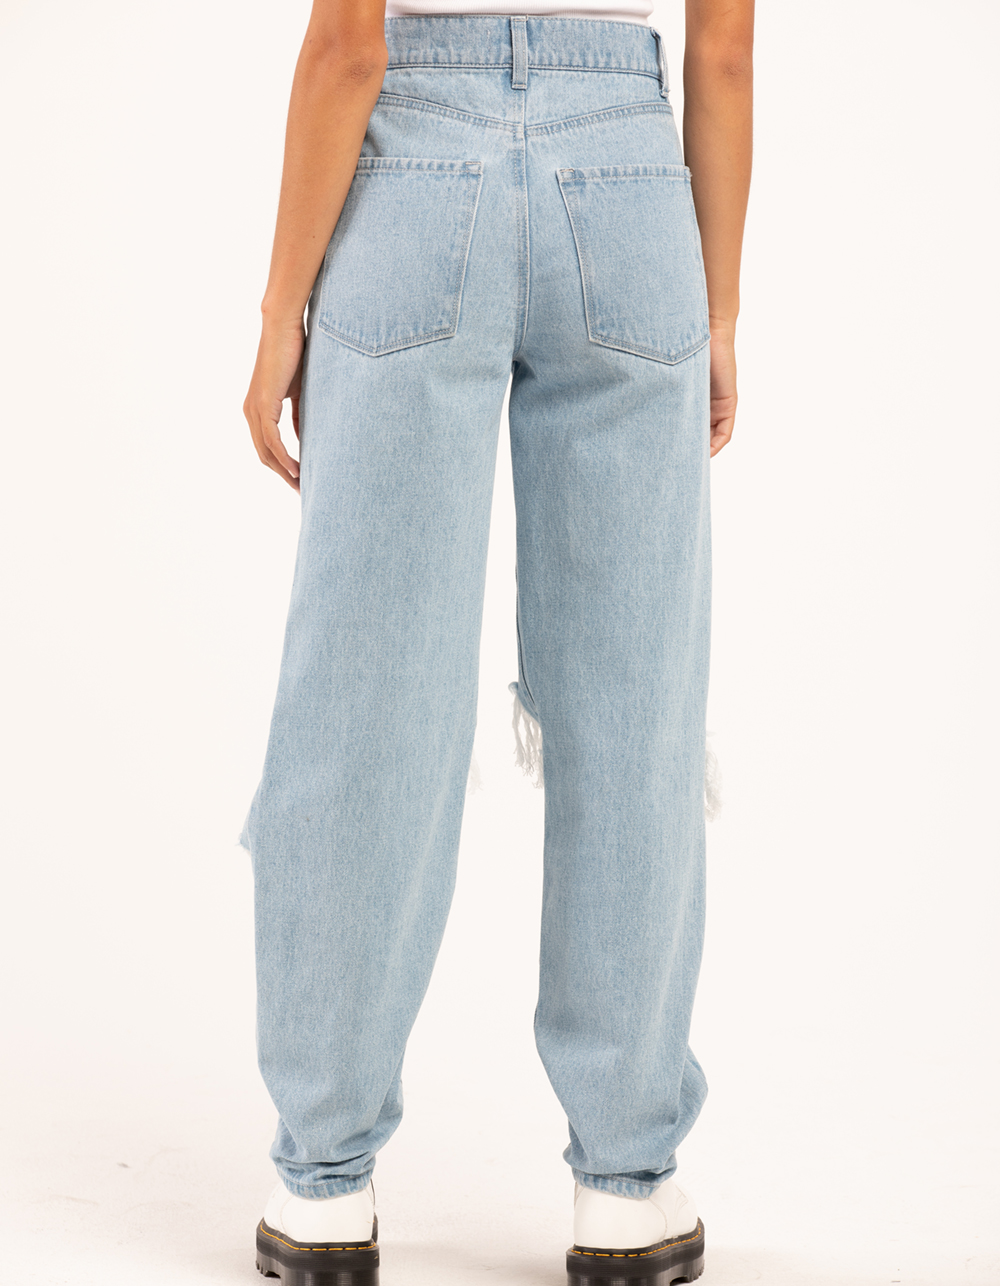 RSQ Womens High Rise Baggy Jeans - LIGHT WASH